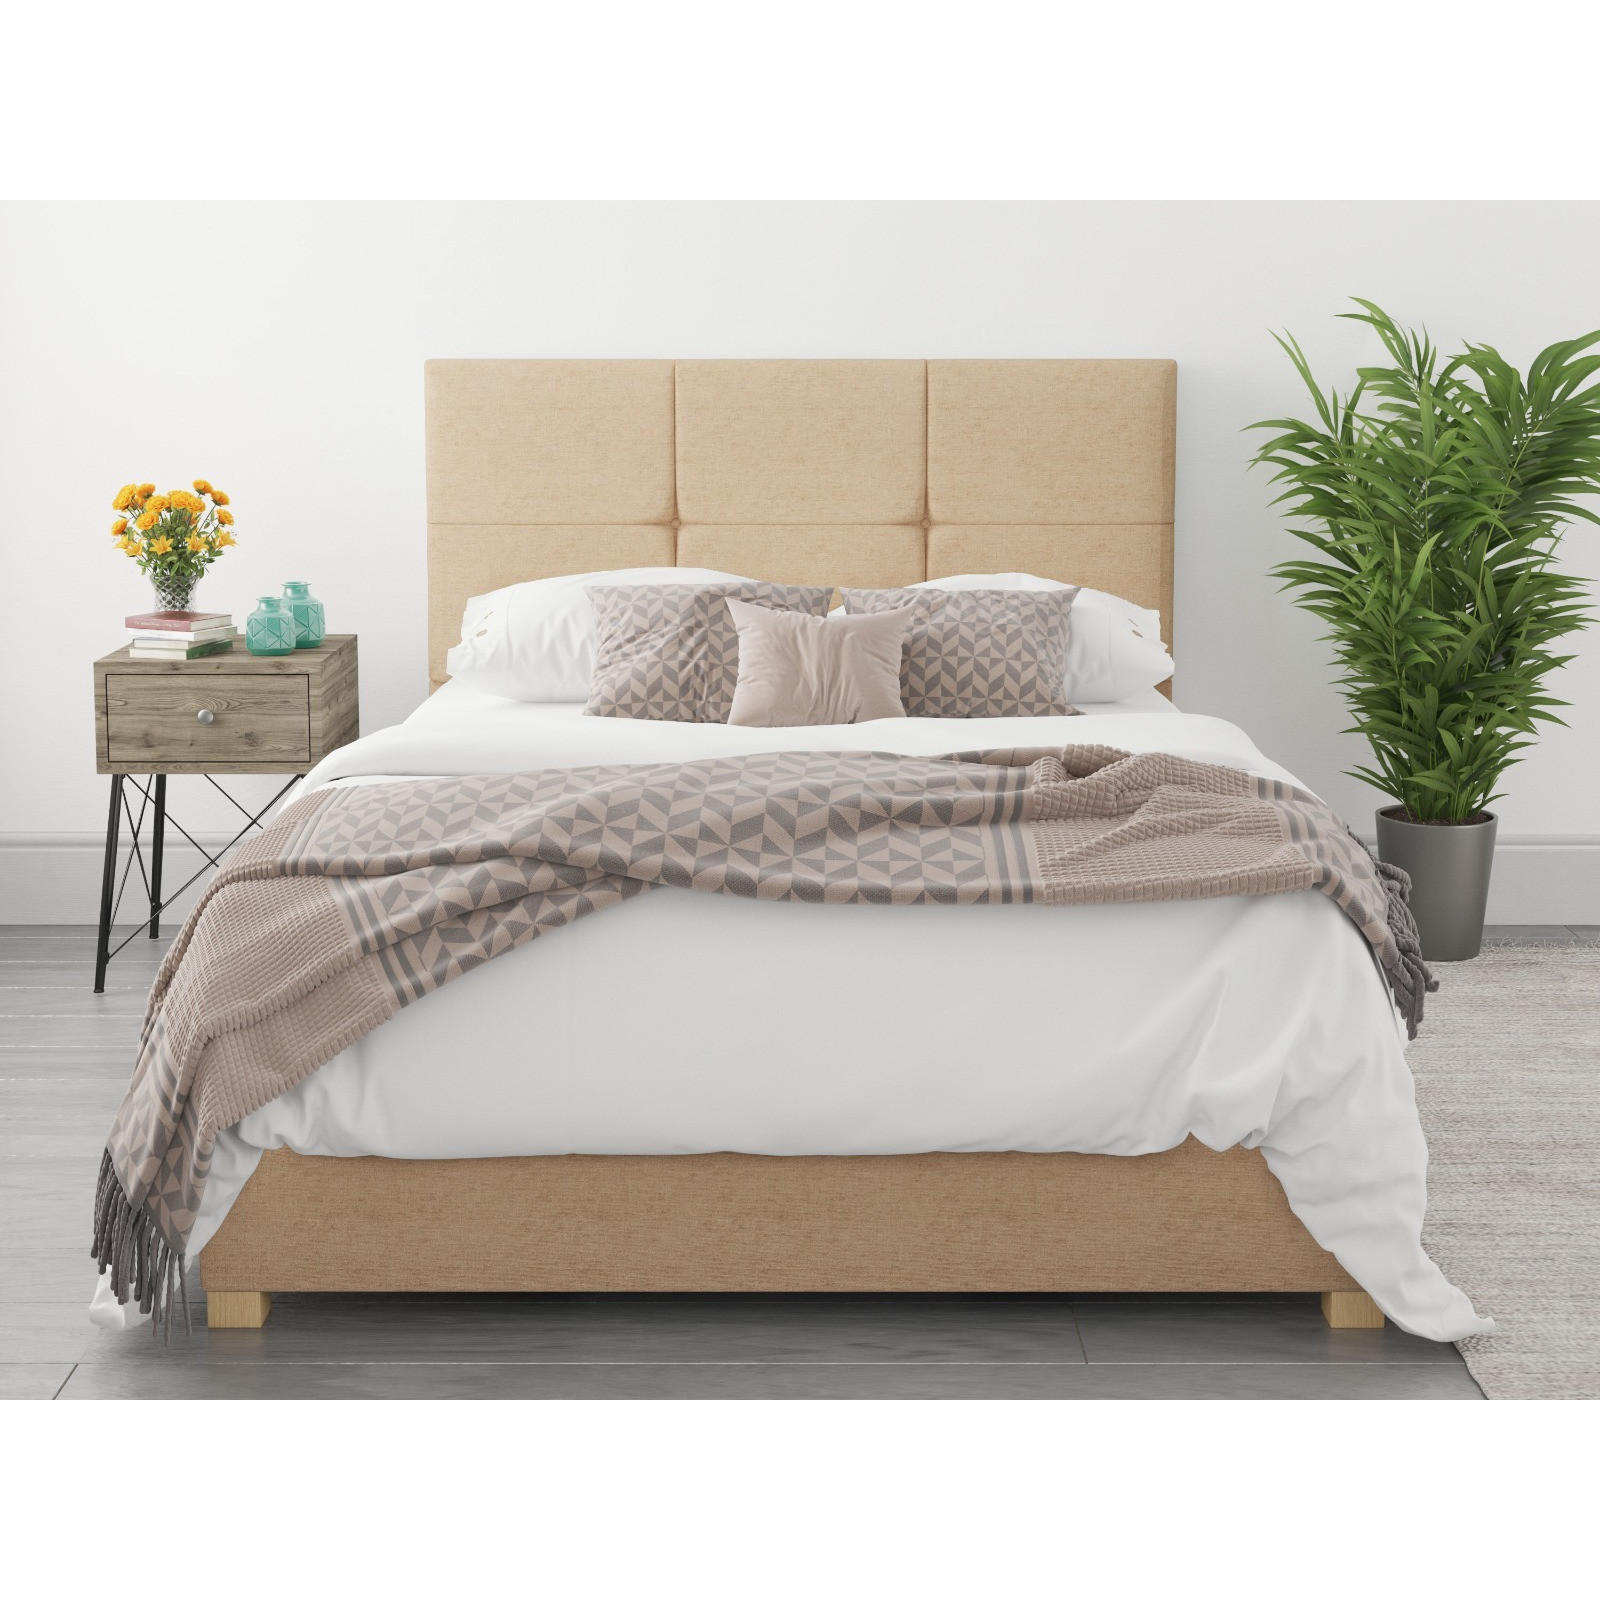 Aspire Caine Ottoman Bed Firenza Velour Champagne SuperKing - image 1